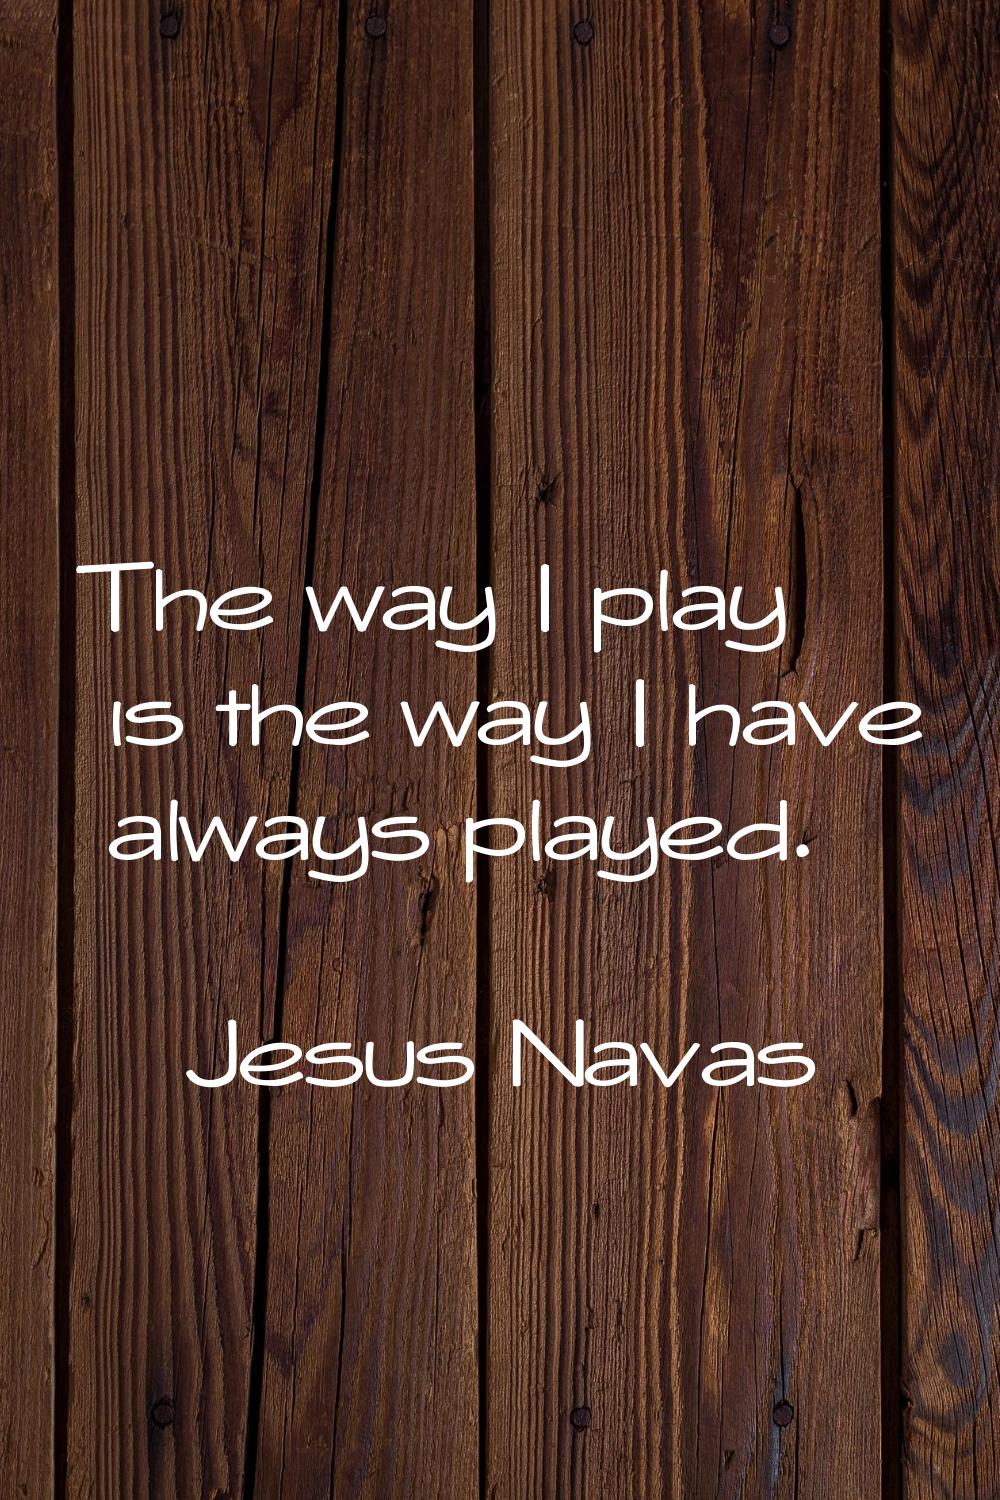 The way I play is the way I have always played.